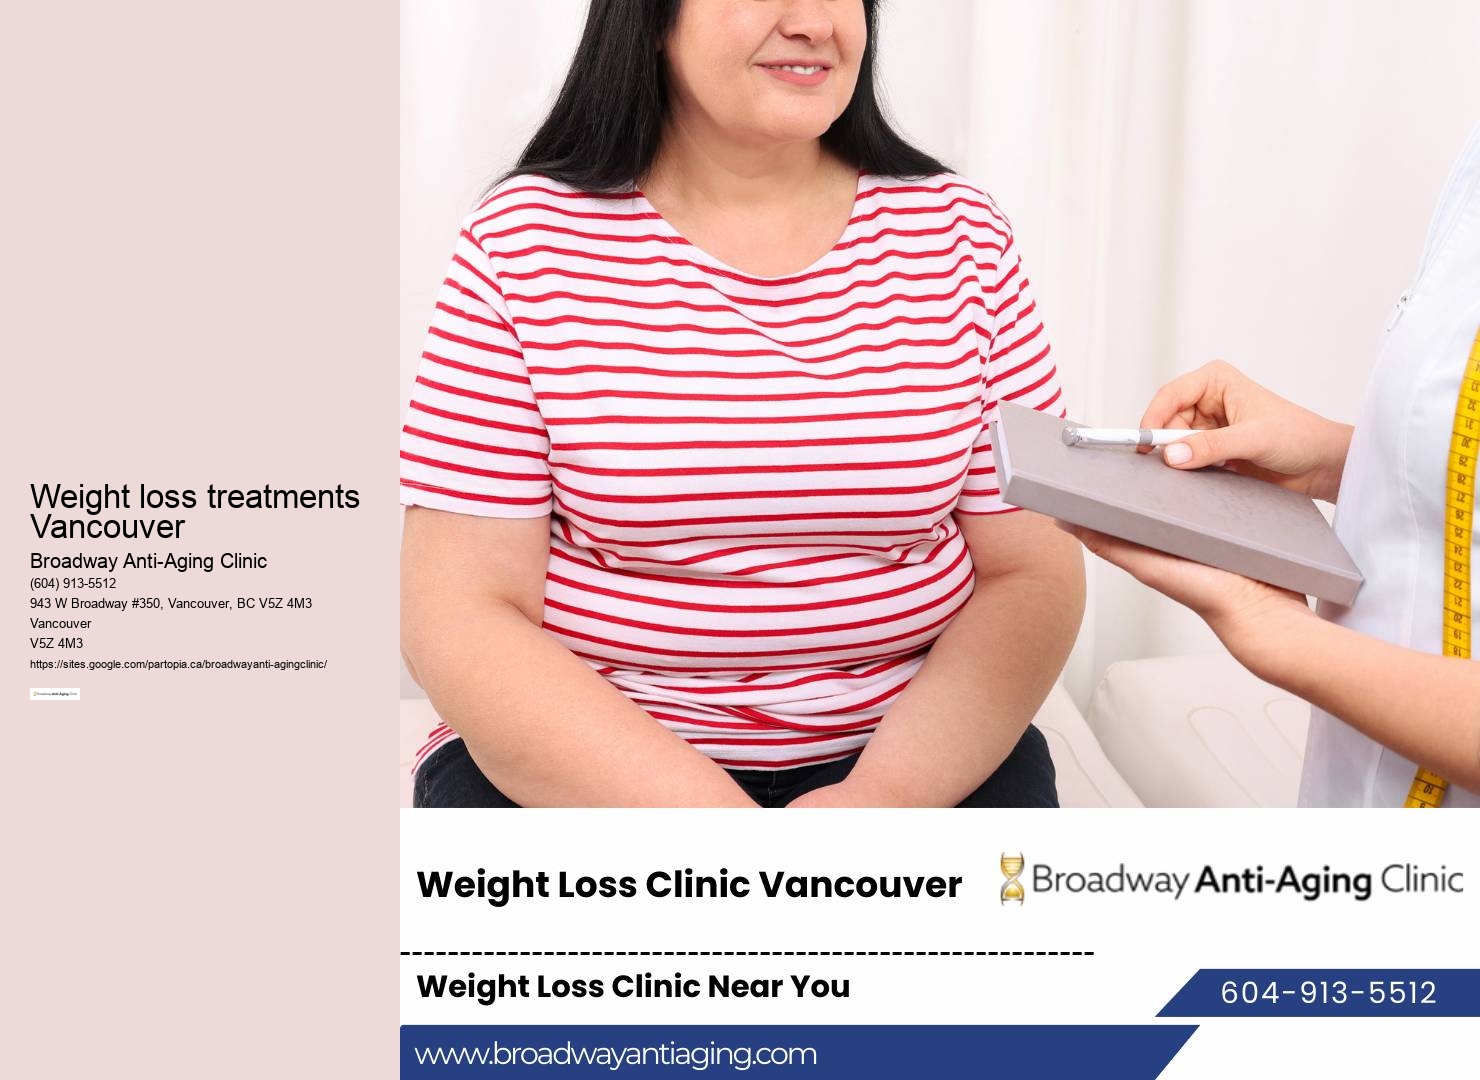 Vancouver Weight Loss Specialist Services